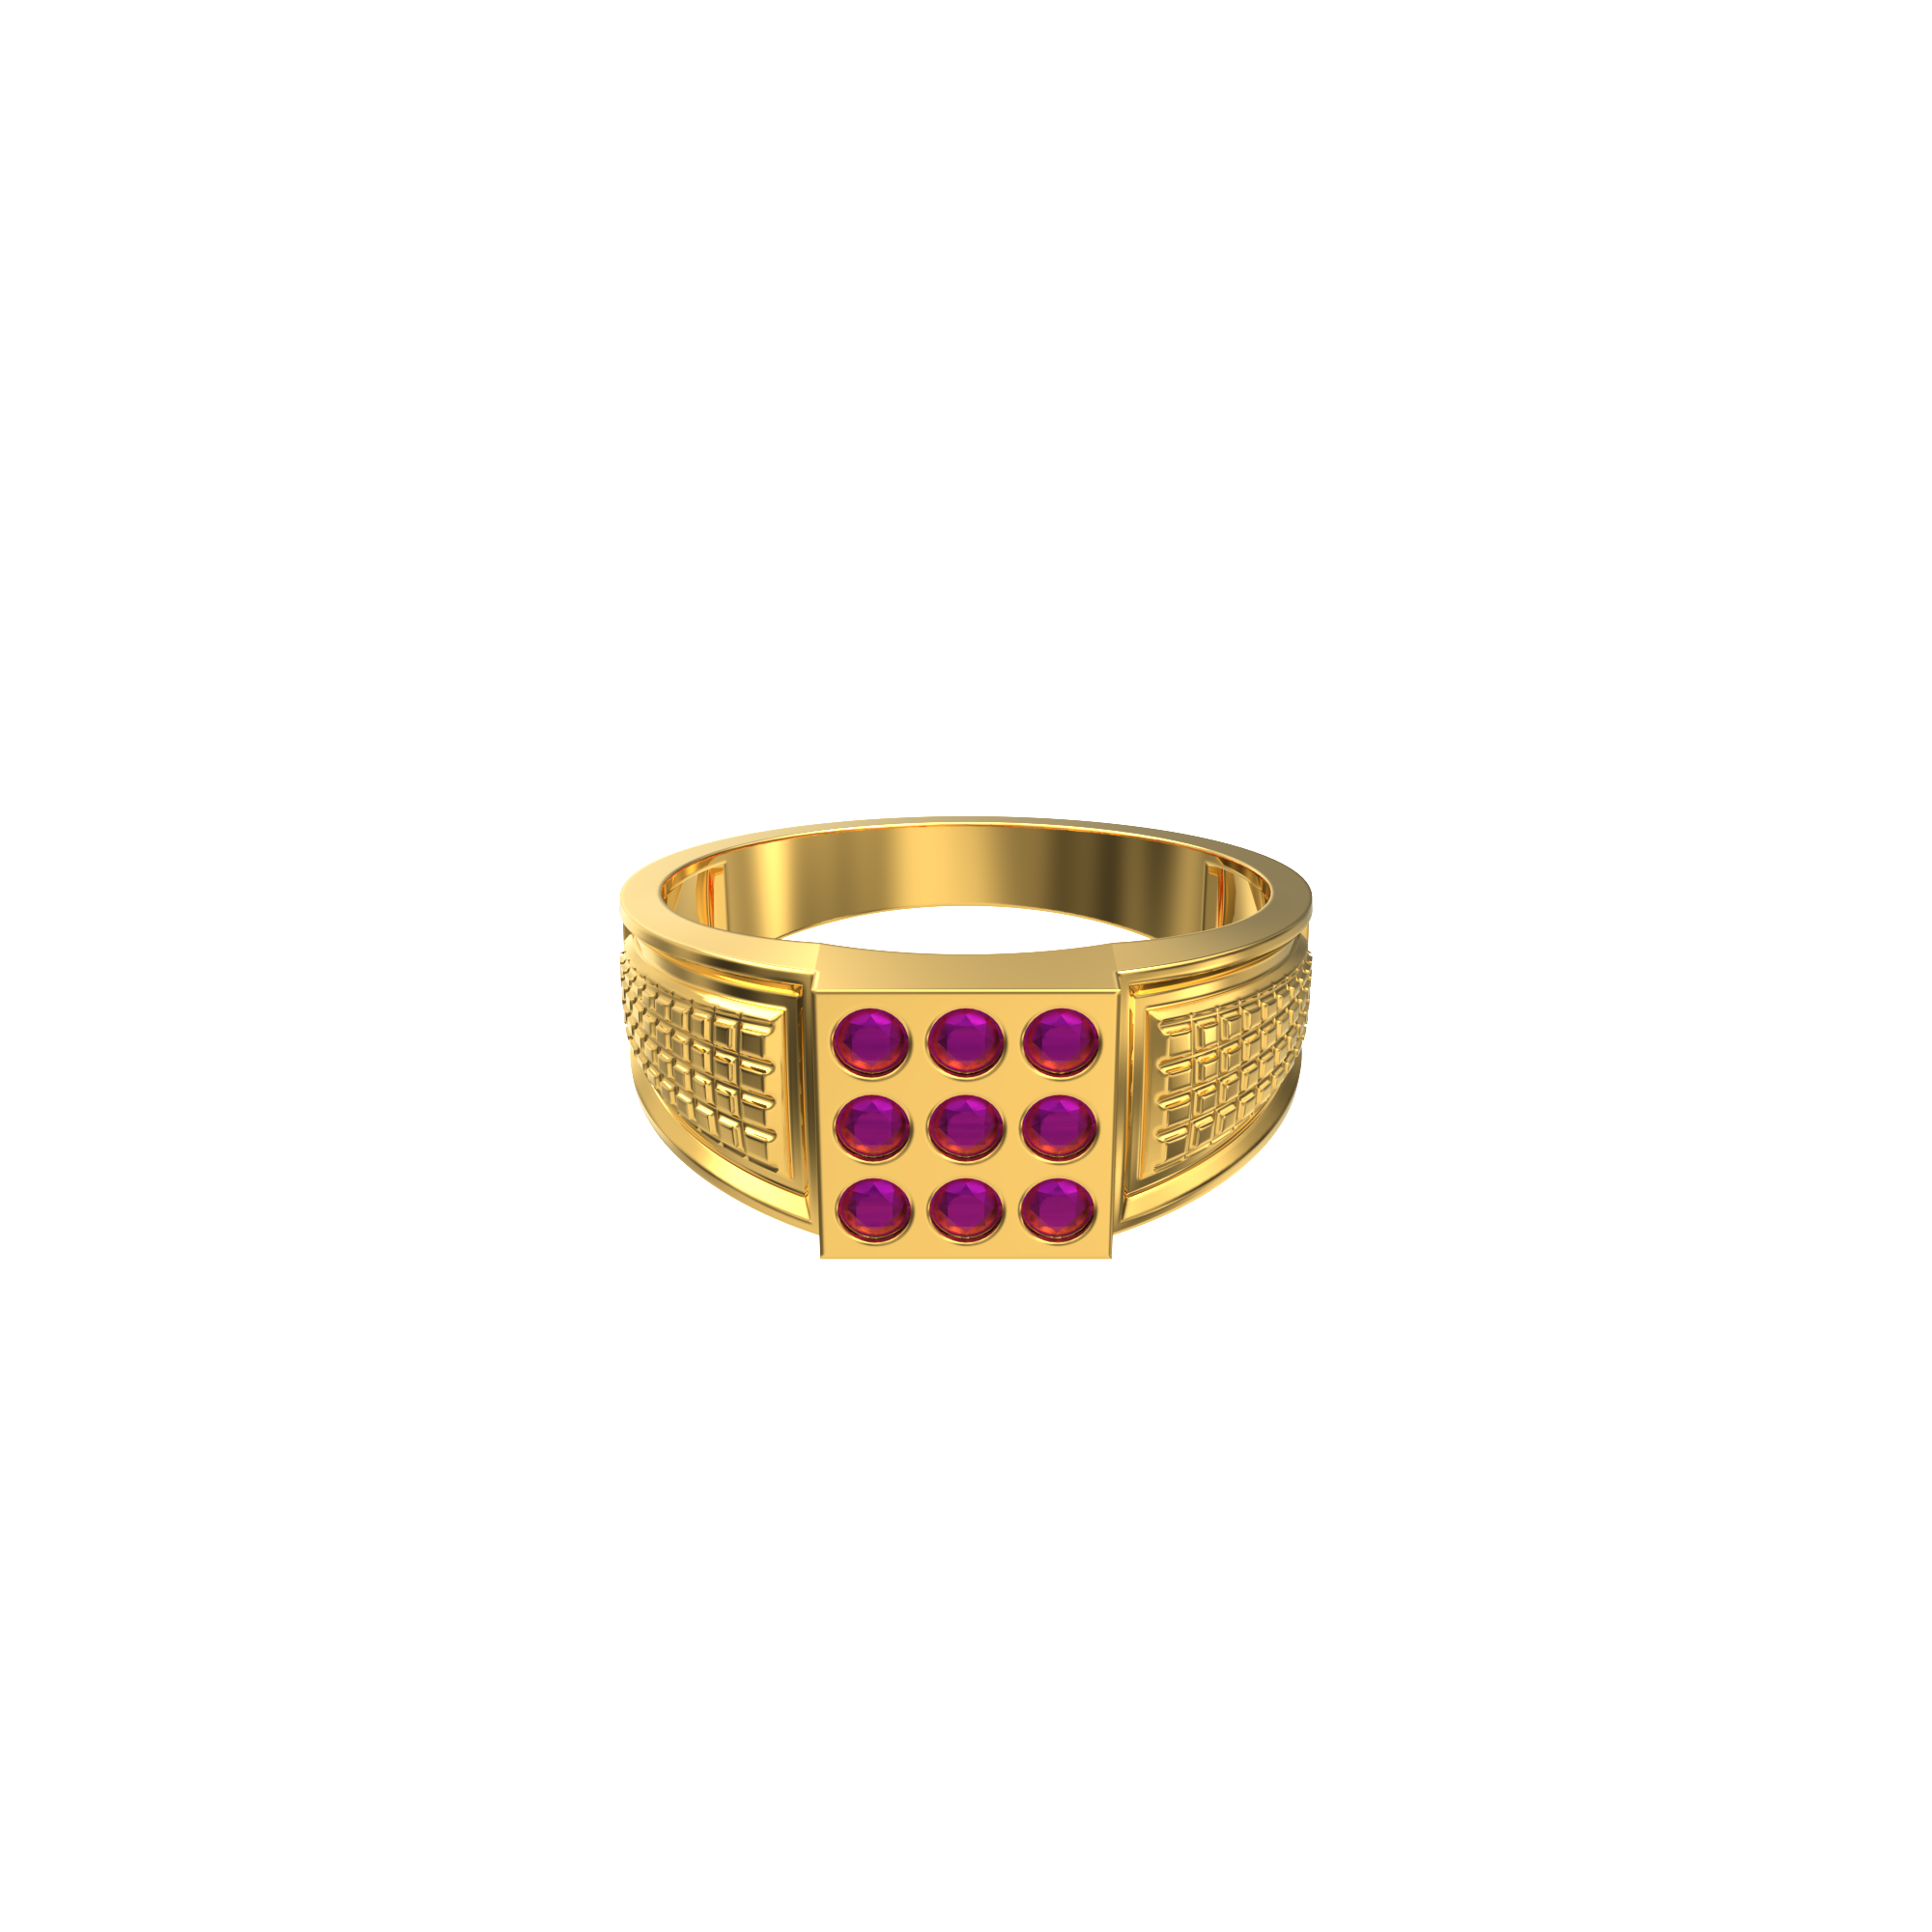 Square Design Gents Gold Ring